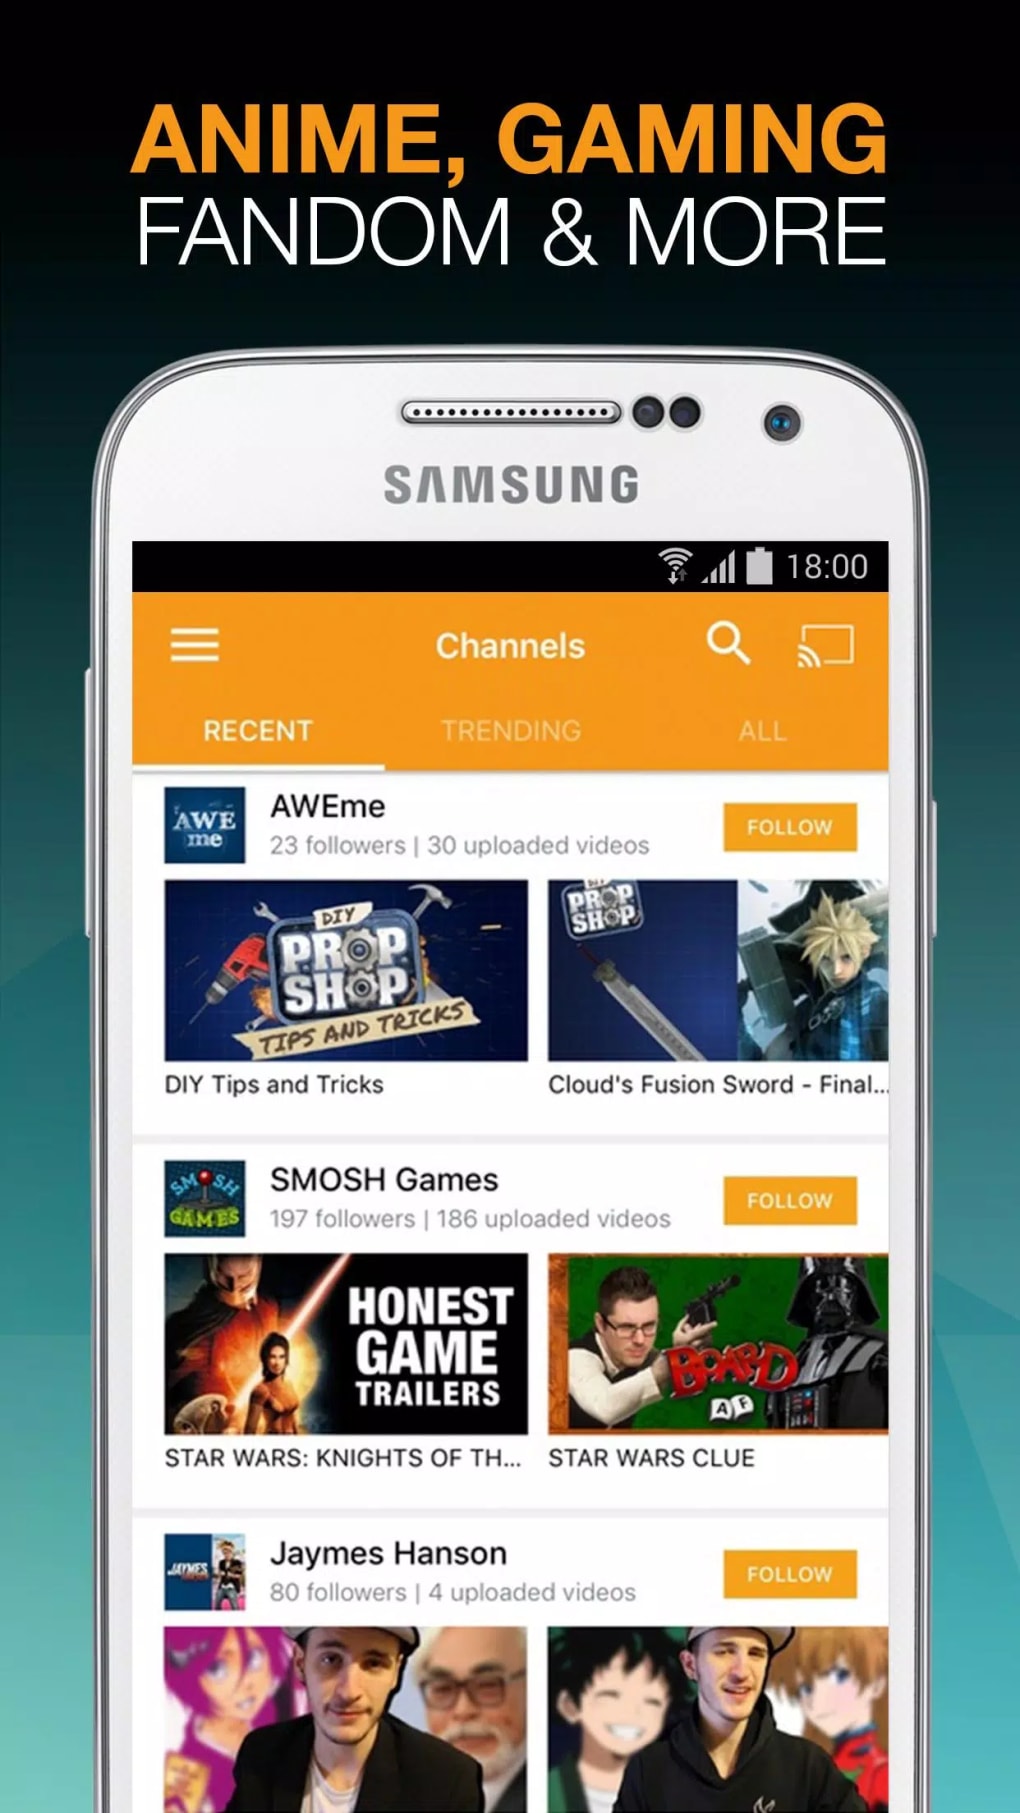 Anime HD TV APK for Android Download